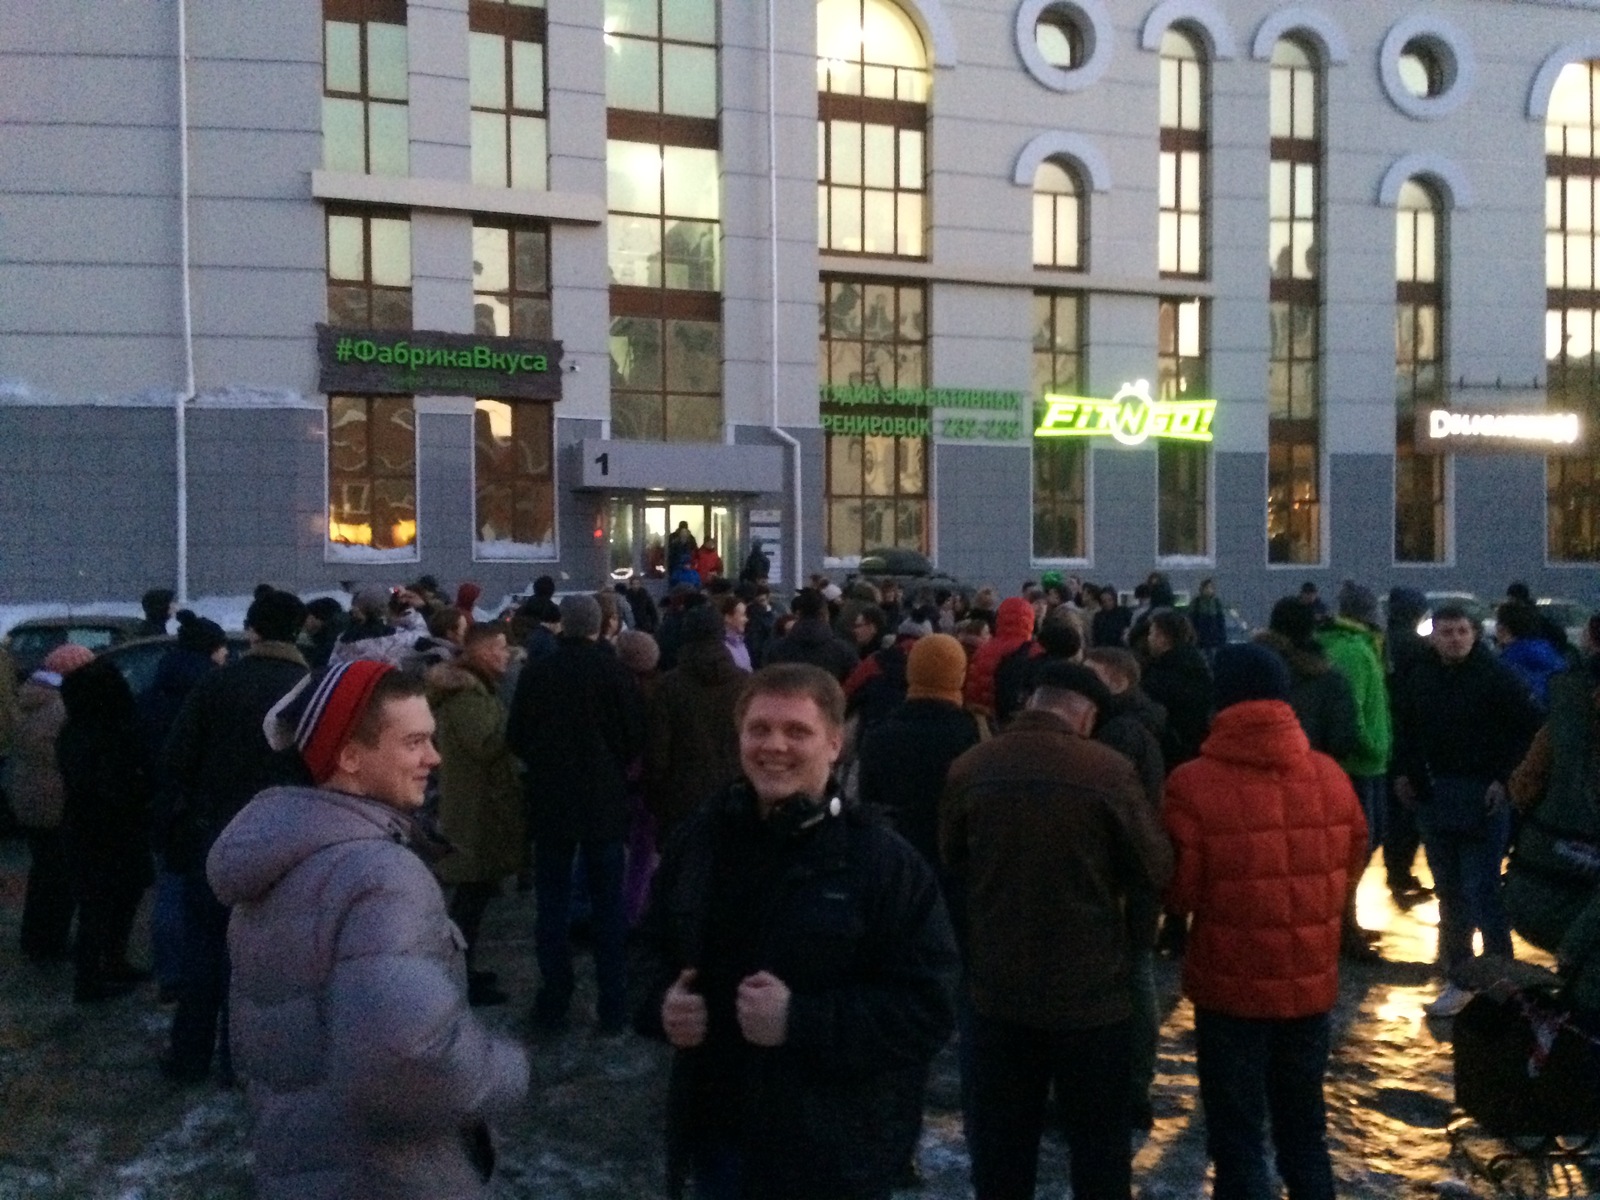 Breaking news from Tomsk - Politics, United Russia, Tomsk, Riot police, Alexey Navalny, My